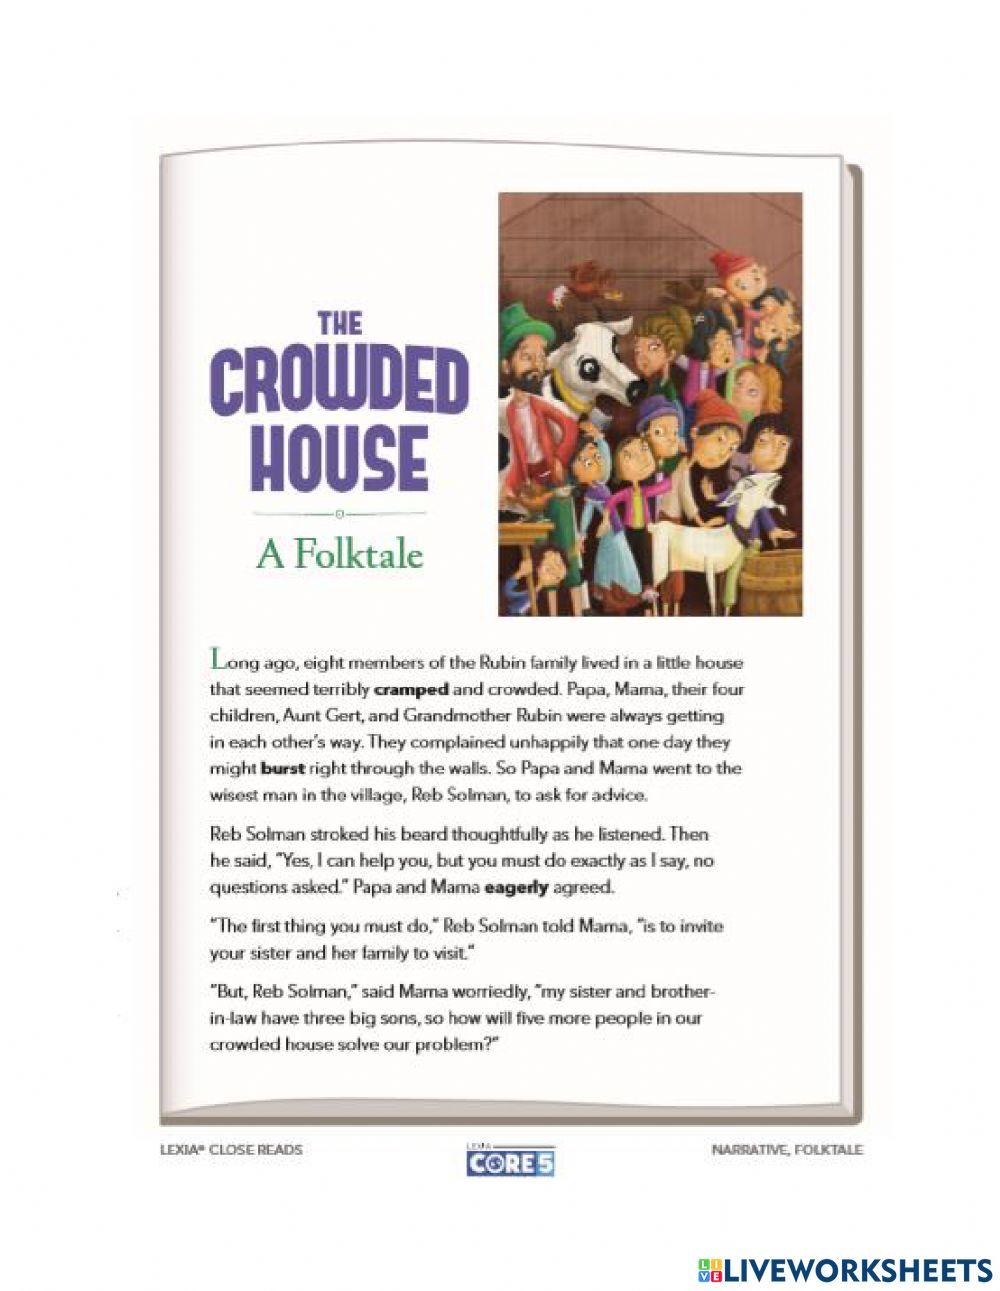 The crowded house folktale